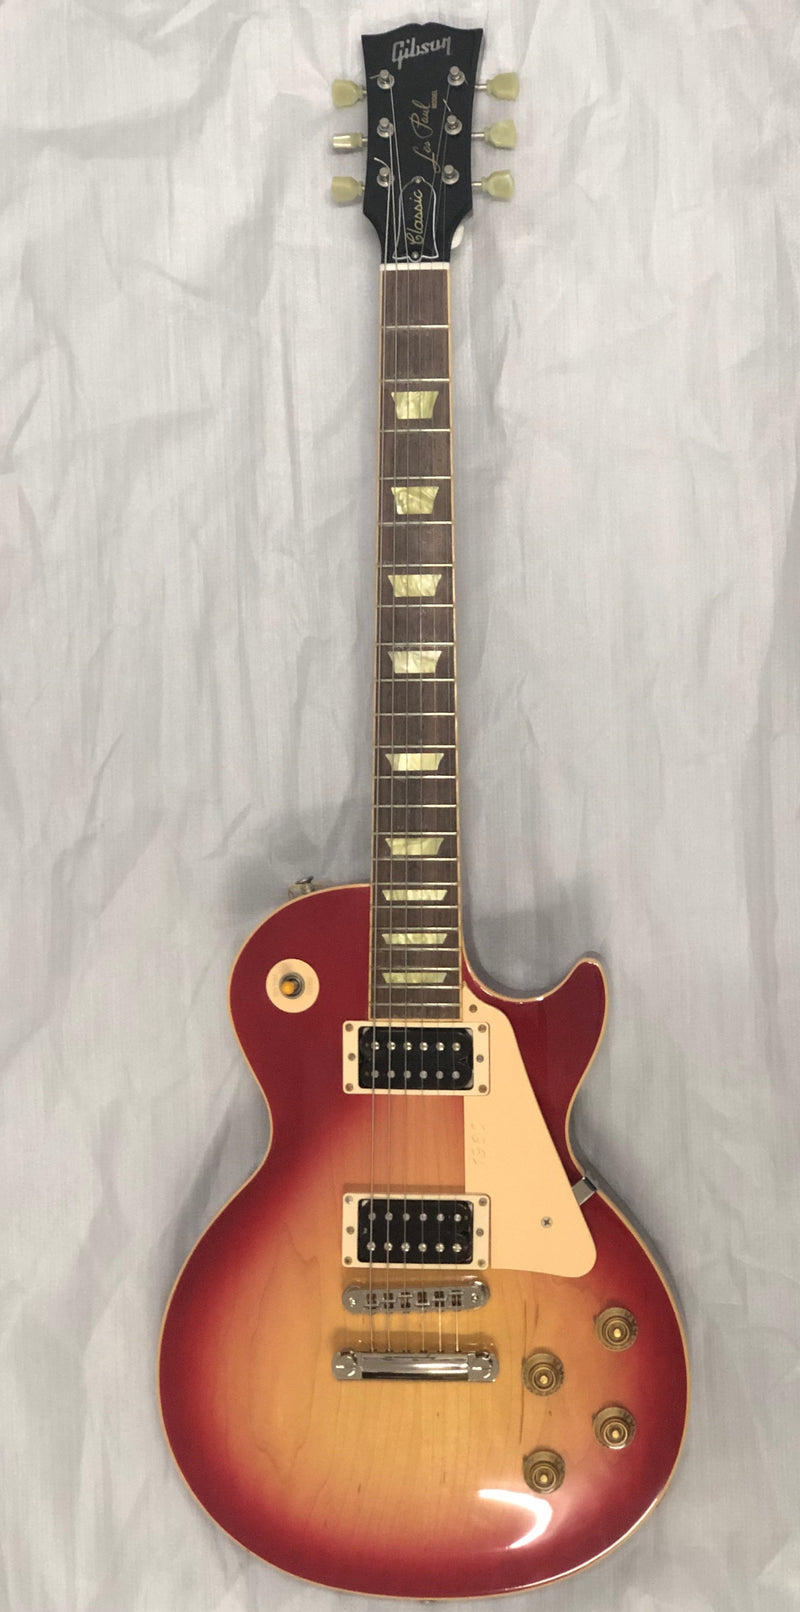 2HD Gibson 1960 Reissue Les Paul Classic Electric Guitar - Heritage Cherry